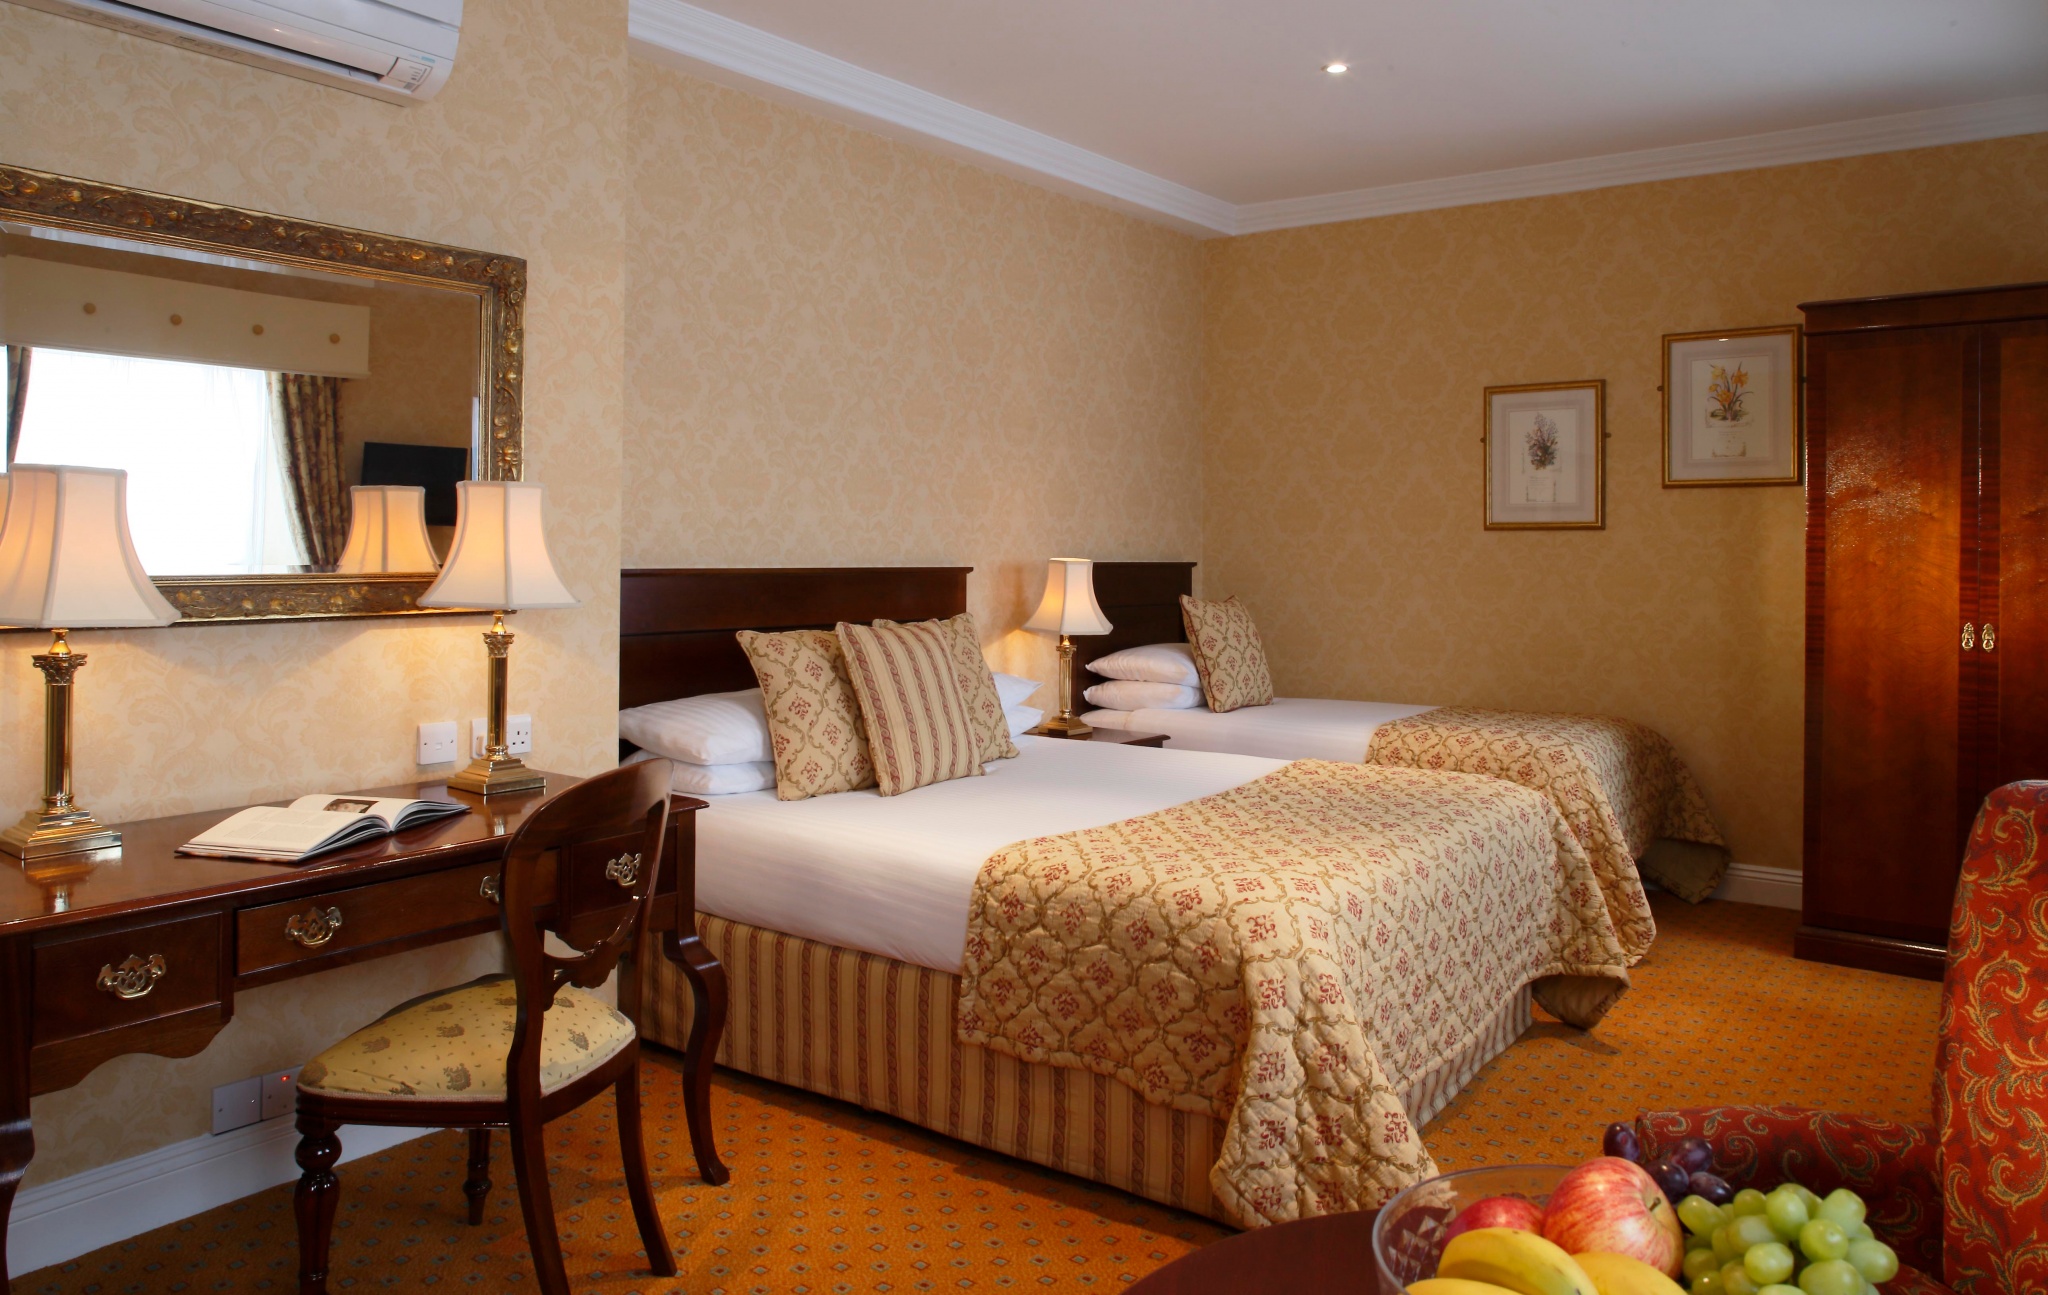 Granville Hotel Bedrooms Four Star City Centre Waterford